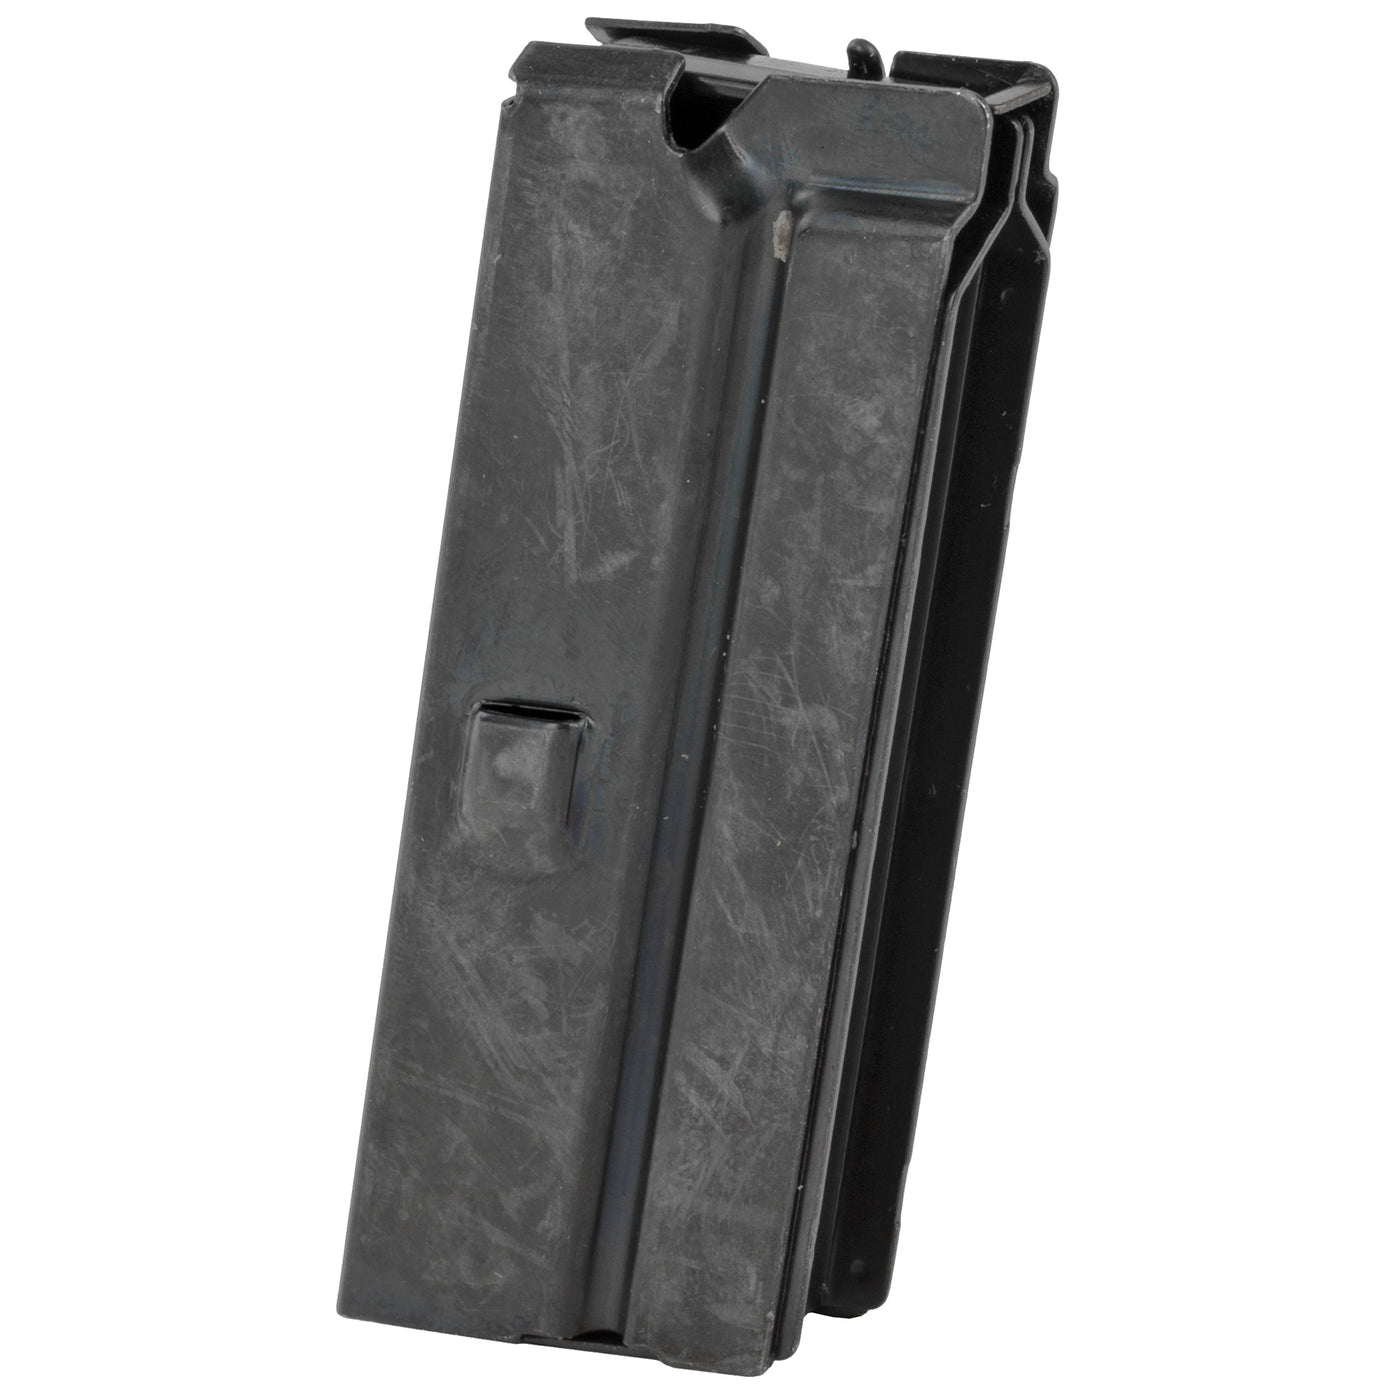 Mag Henry Us Survival Rifle 22lr 8rd